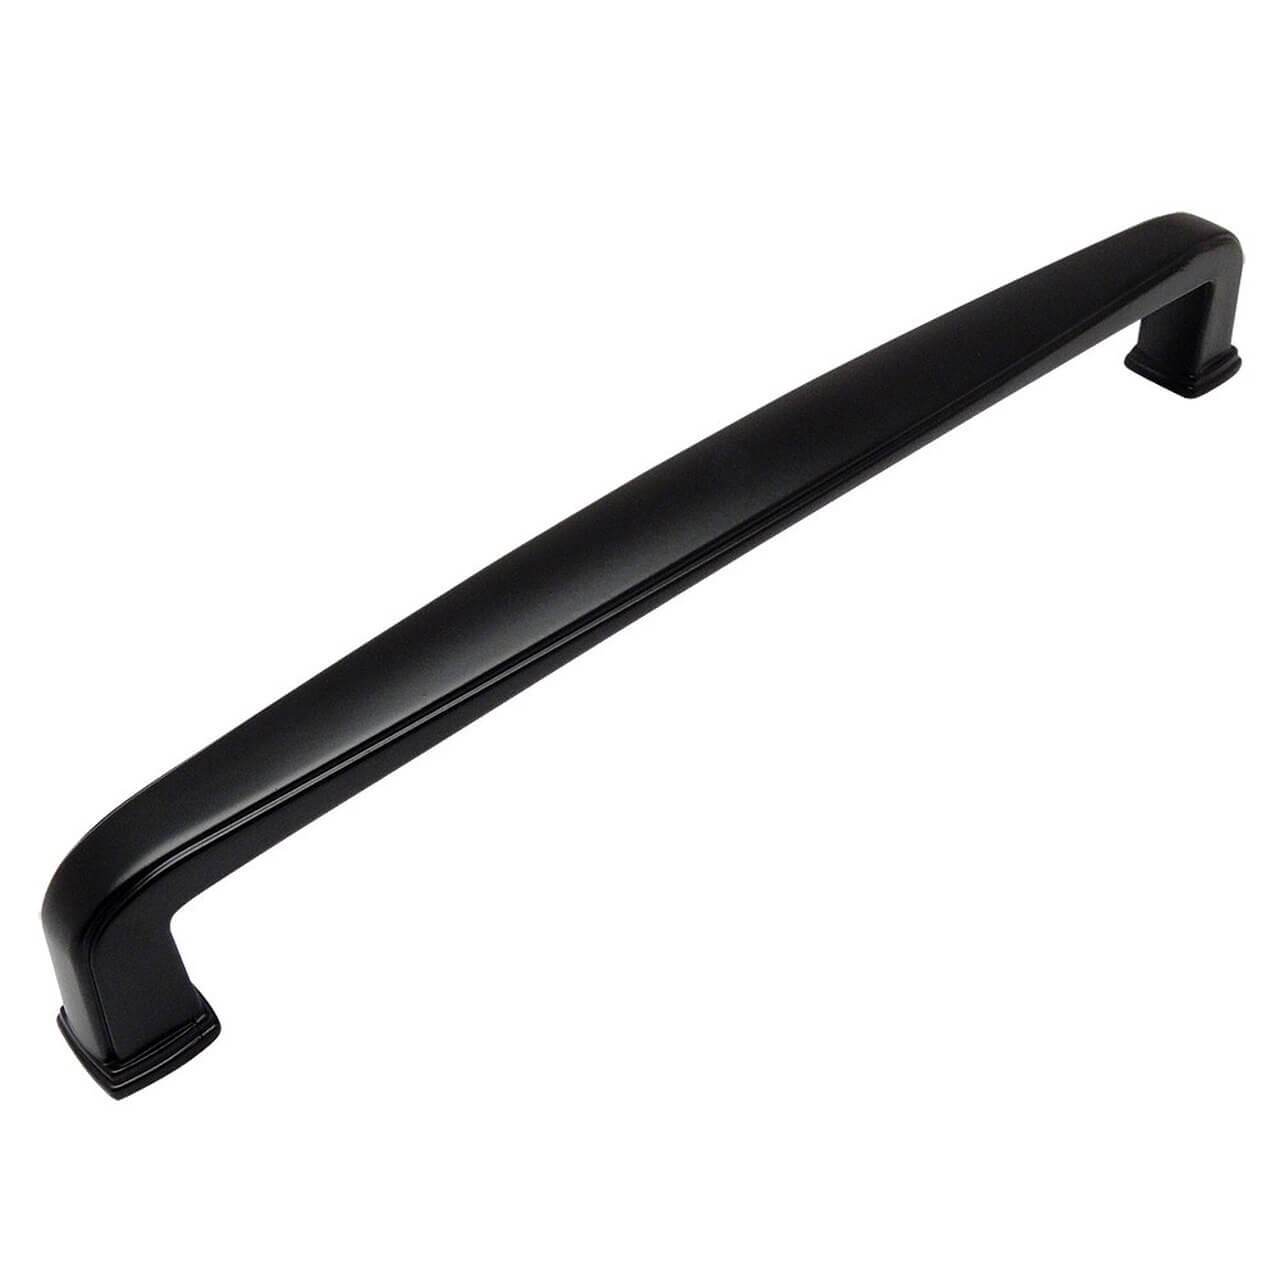 Flat black cabinet pull with six and five sixteenths inch hole spacing